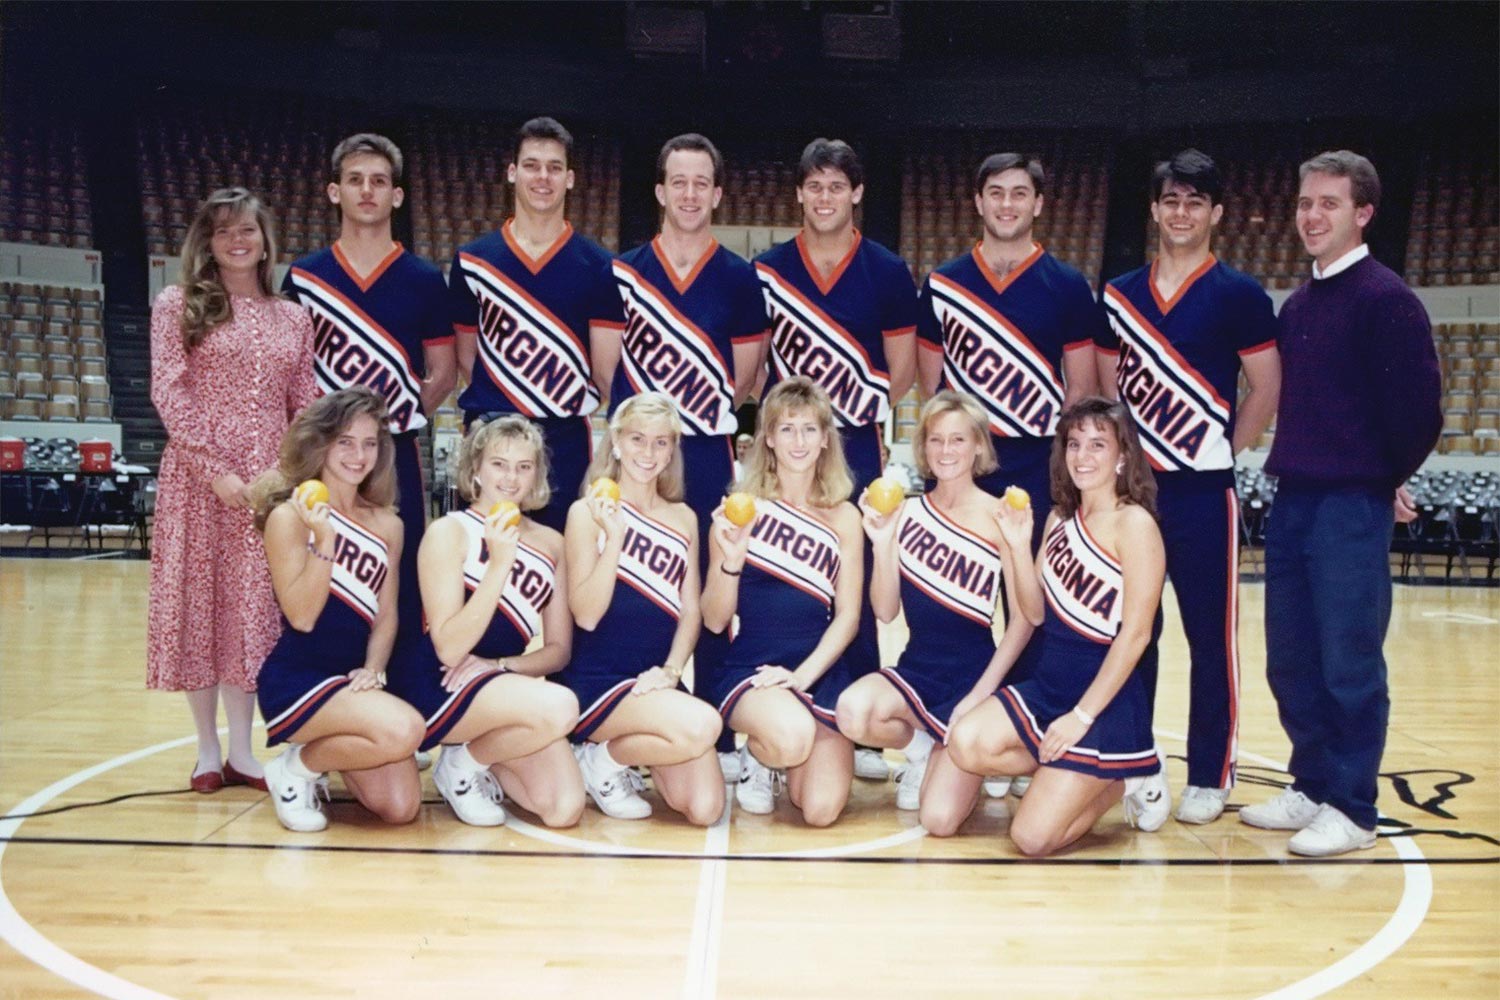 Craig Wood and his fellow cheerleaders for a team photo.  The women hold oranges